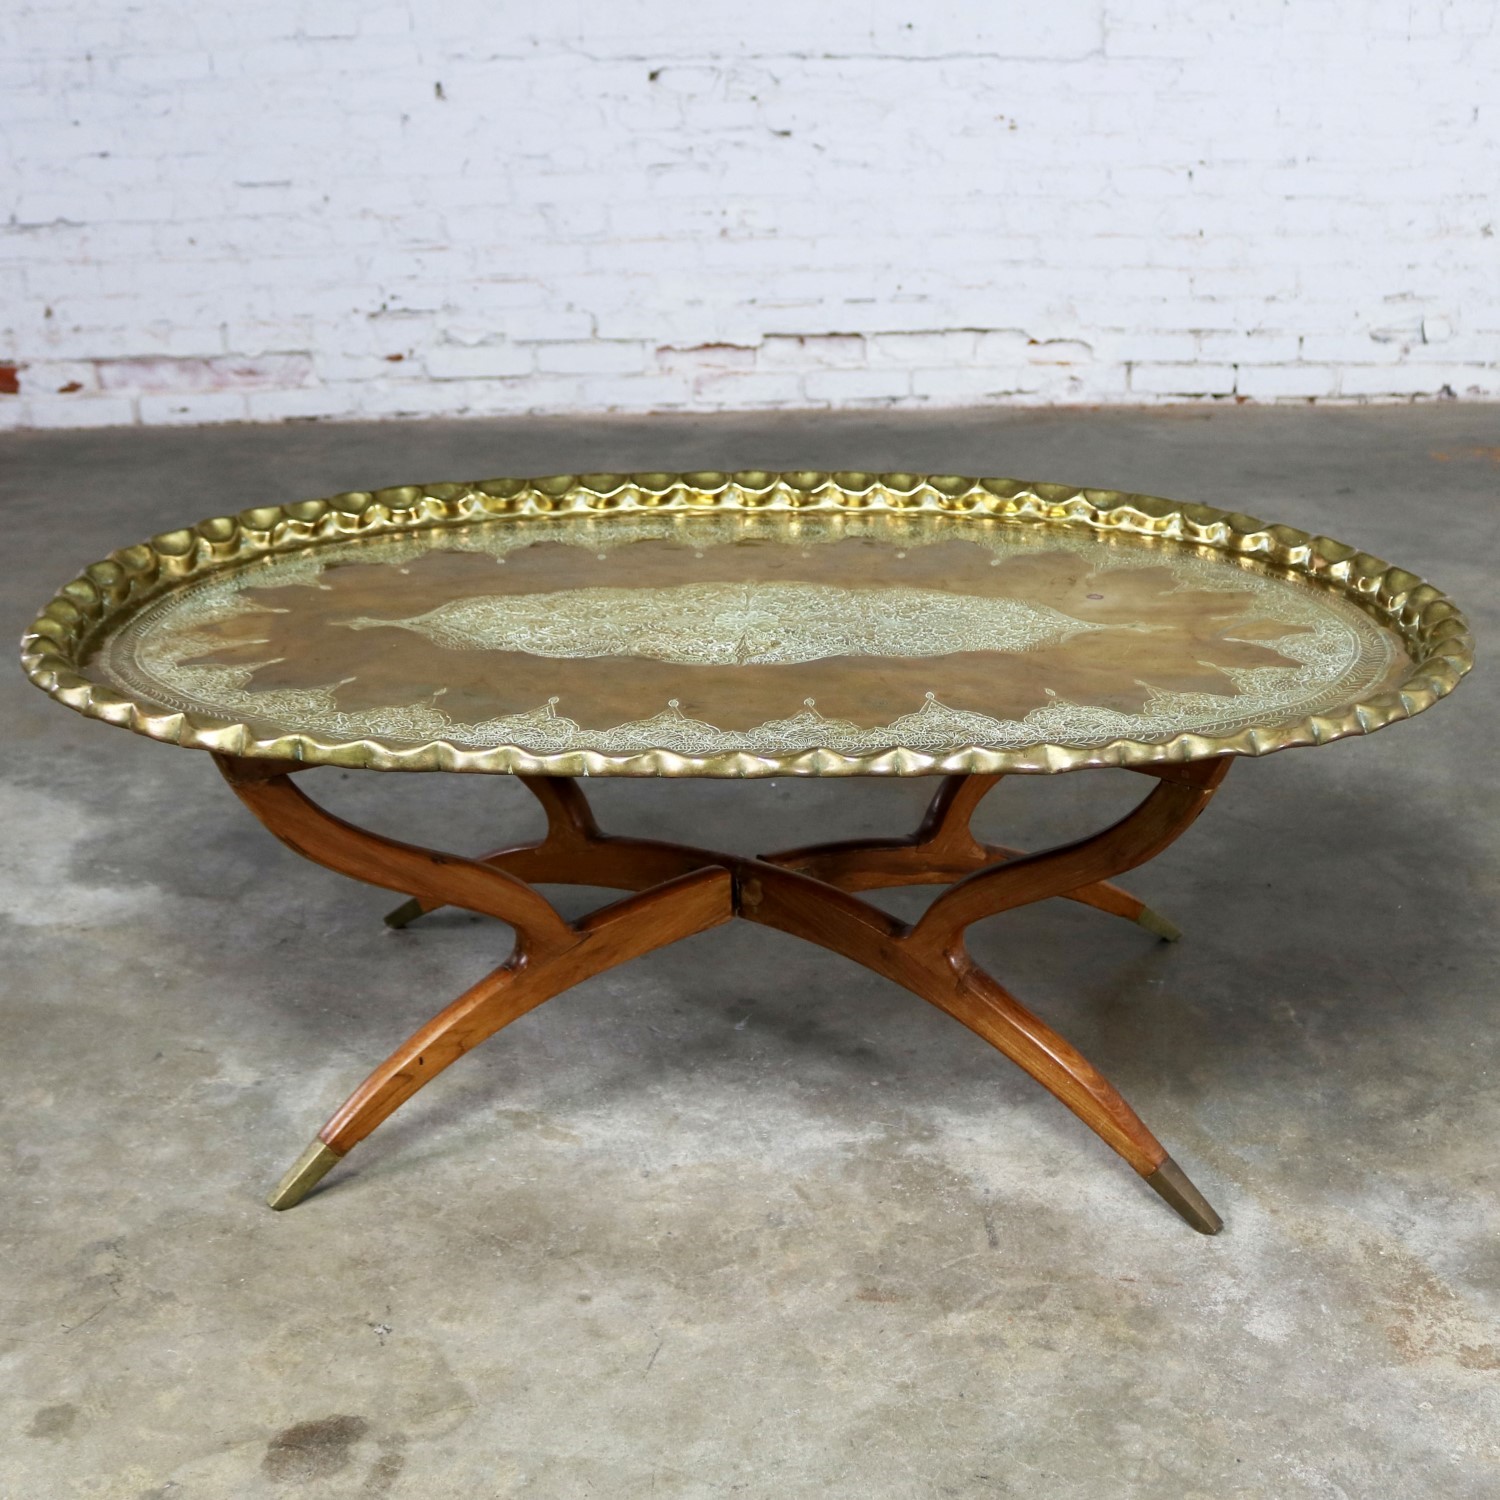 Vintage Indian Moroccan Style Oval Tray Top Spider 4 Leg Coffee Table